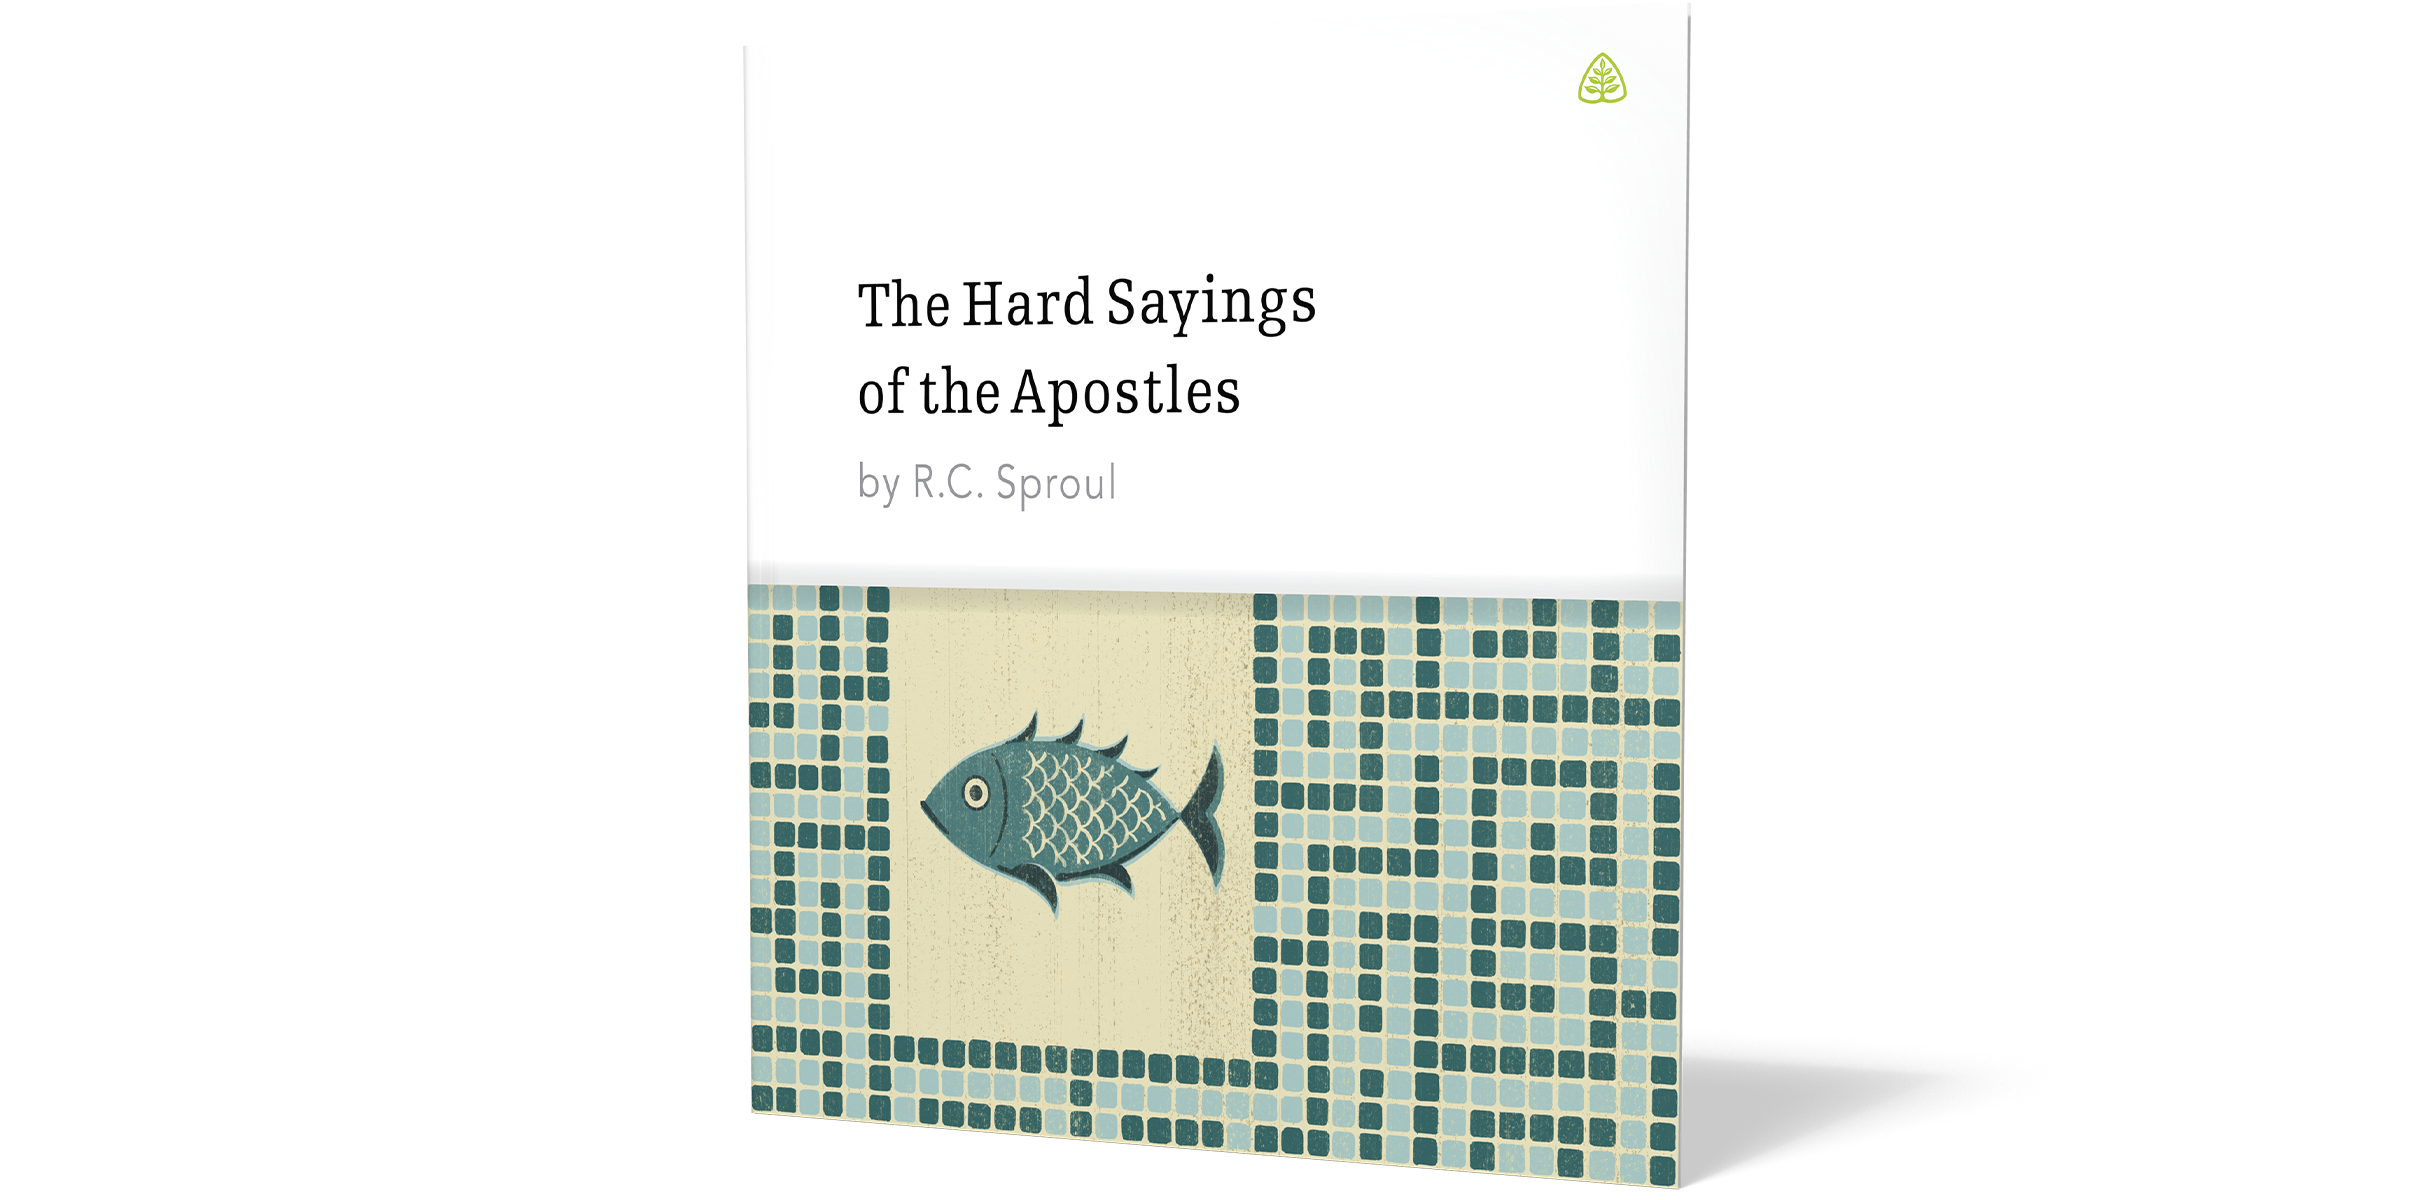 The Hard Sayings of the Apostles